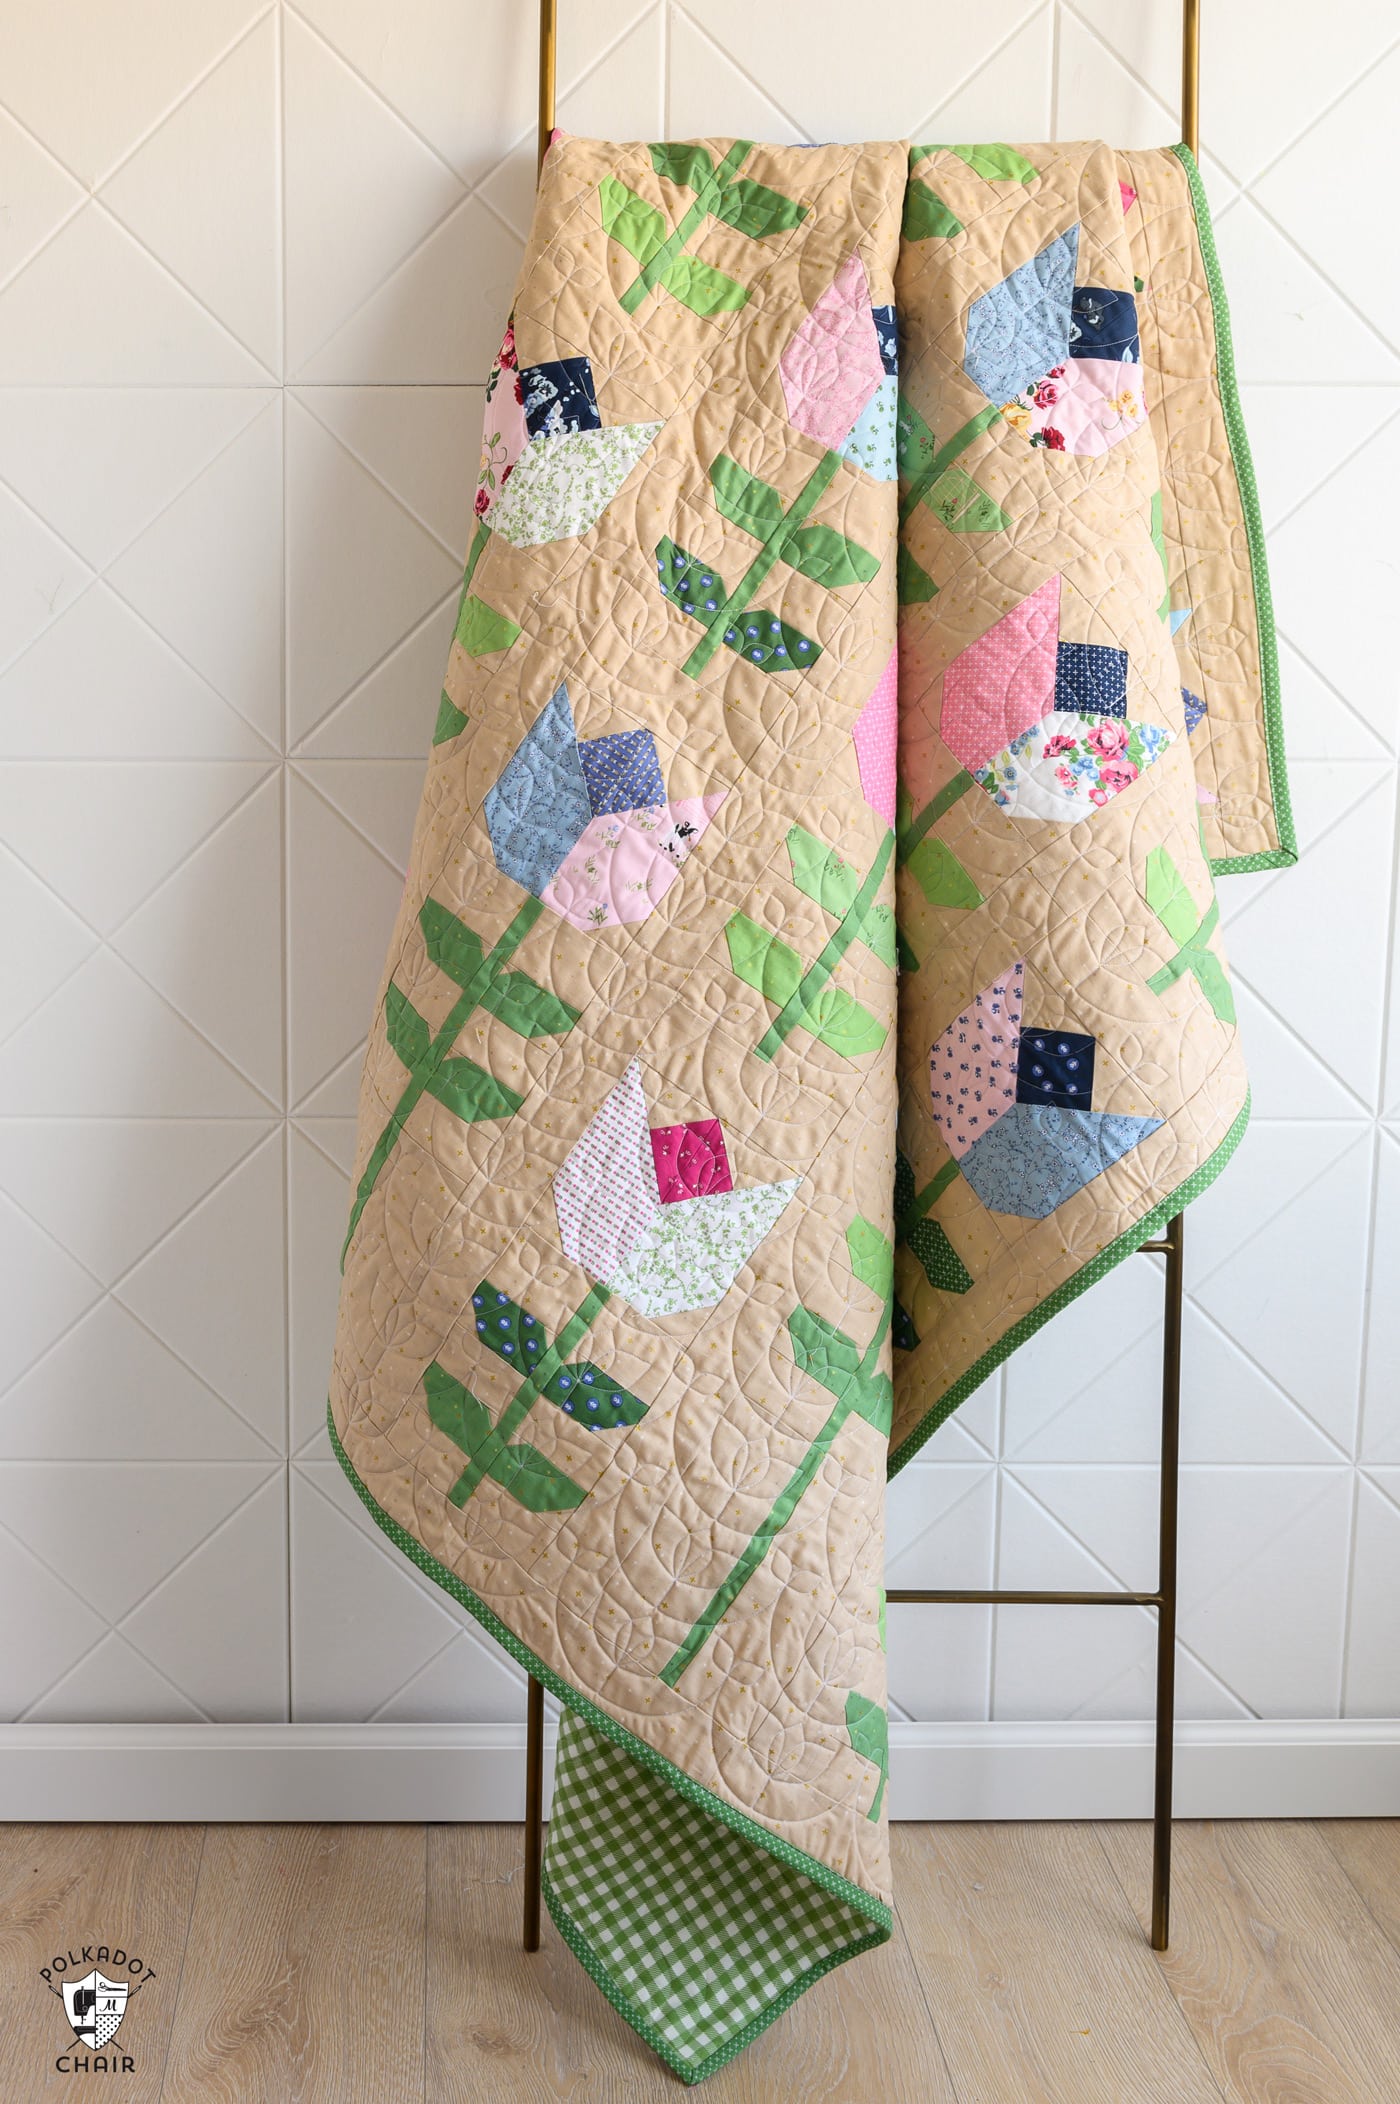 Tulip quilt on quilt ladder in front of white wall